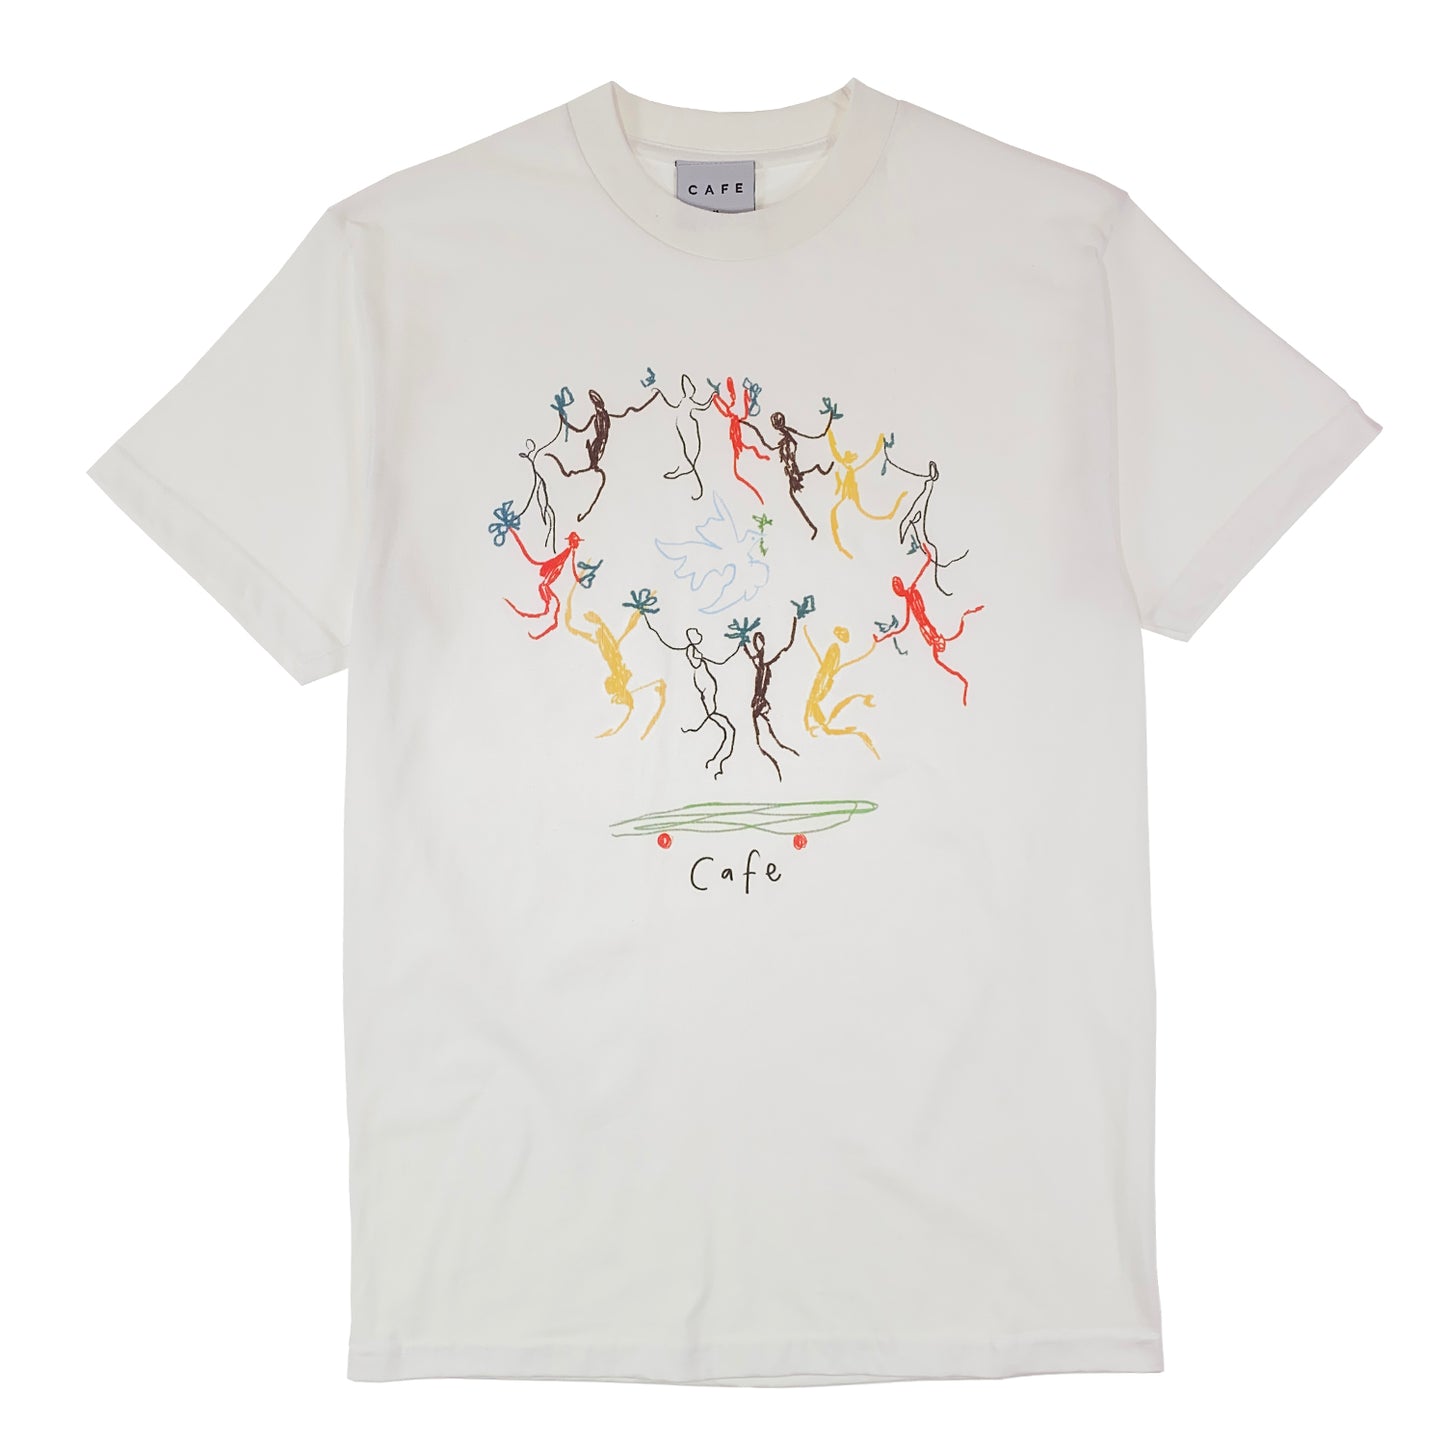 Skateboard Cafe - Peace T Shirt - White - Prime Delux Store